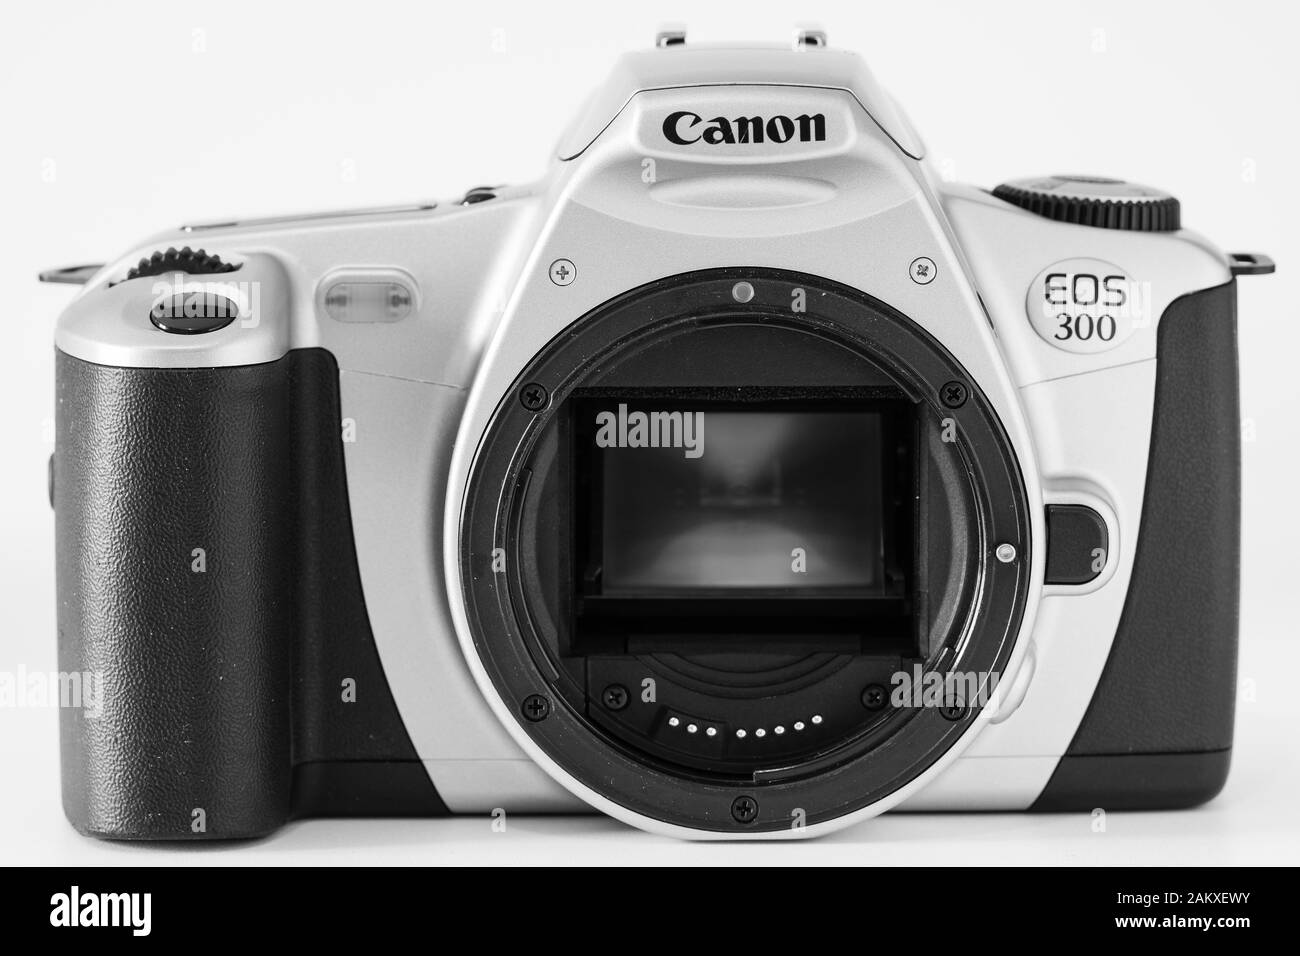 Front view of a Canon Eos 300 camera without lens, visible mirror, analog reflex system. Stock Photo